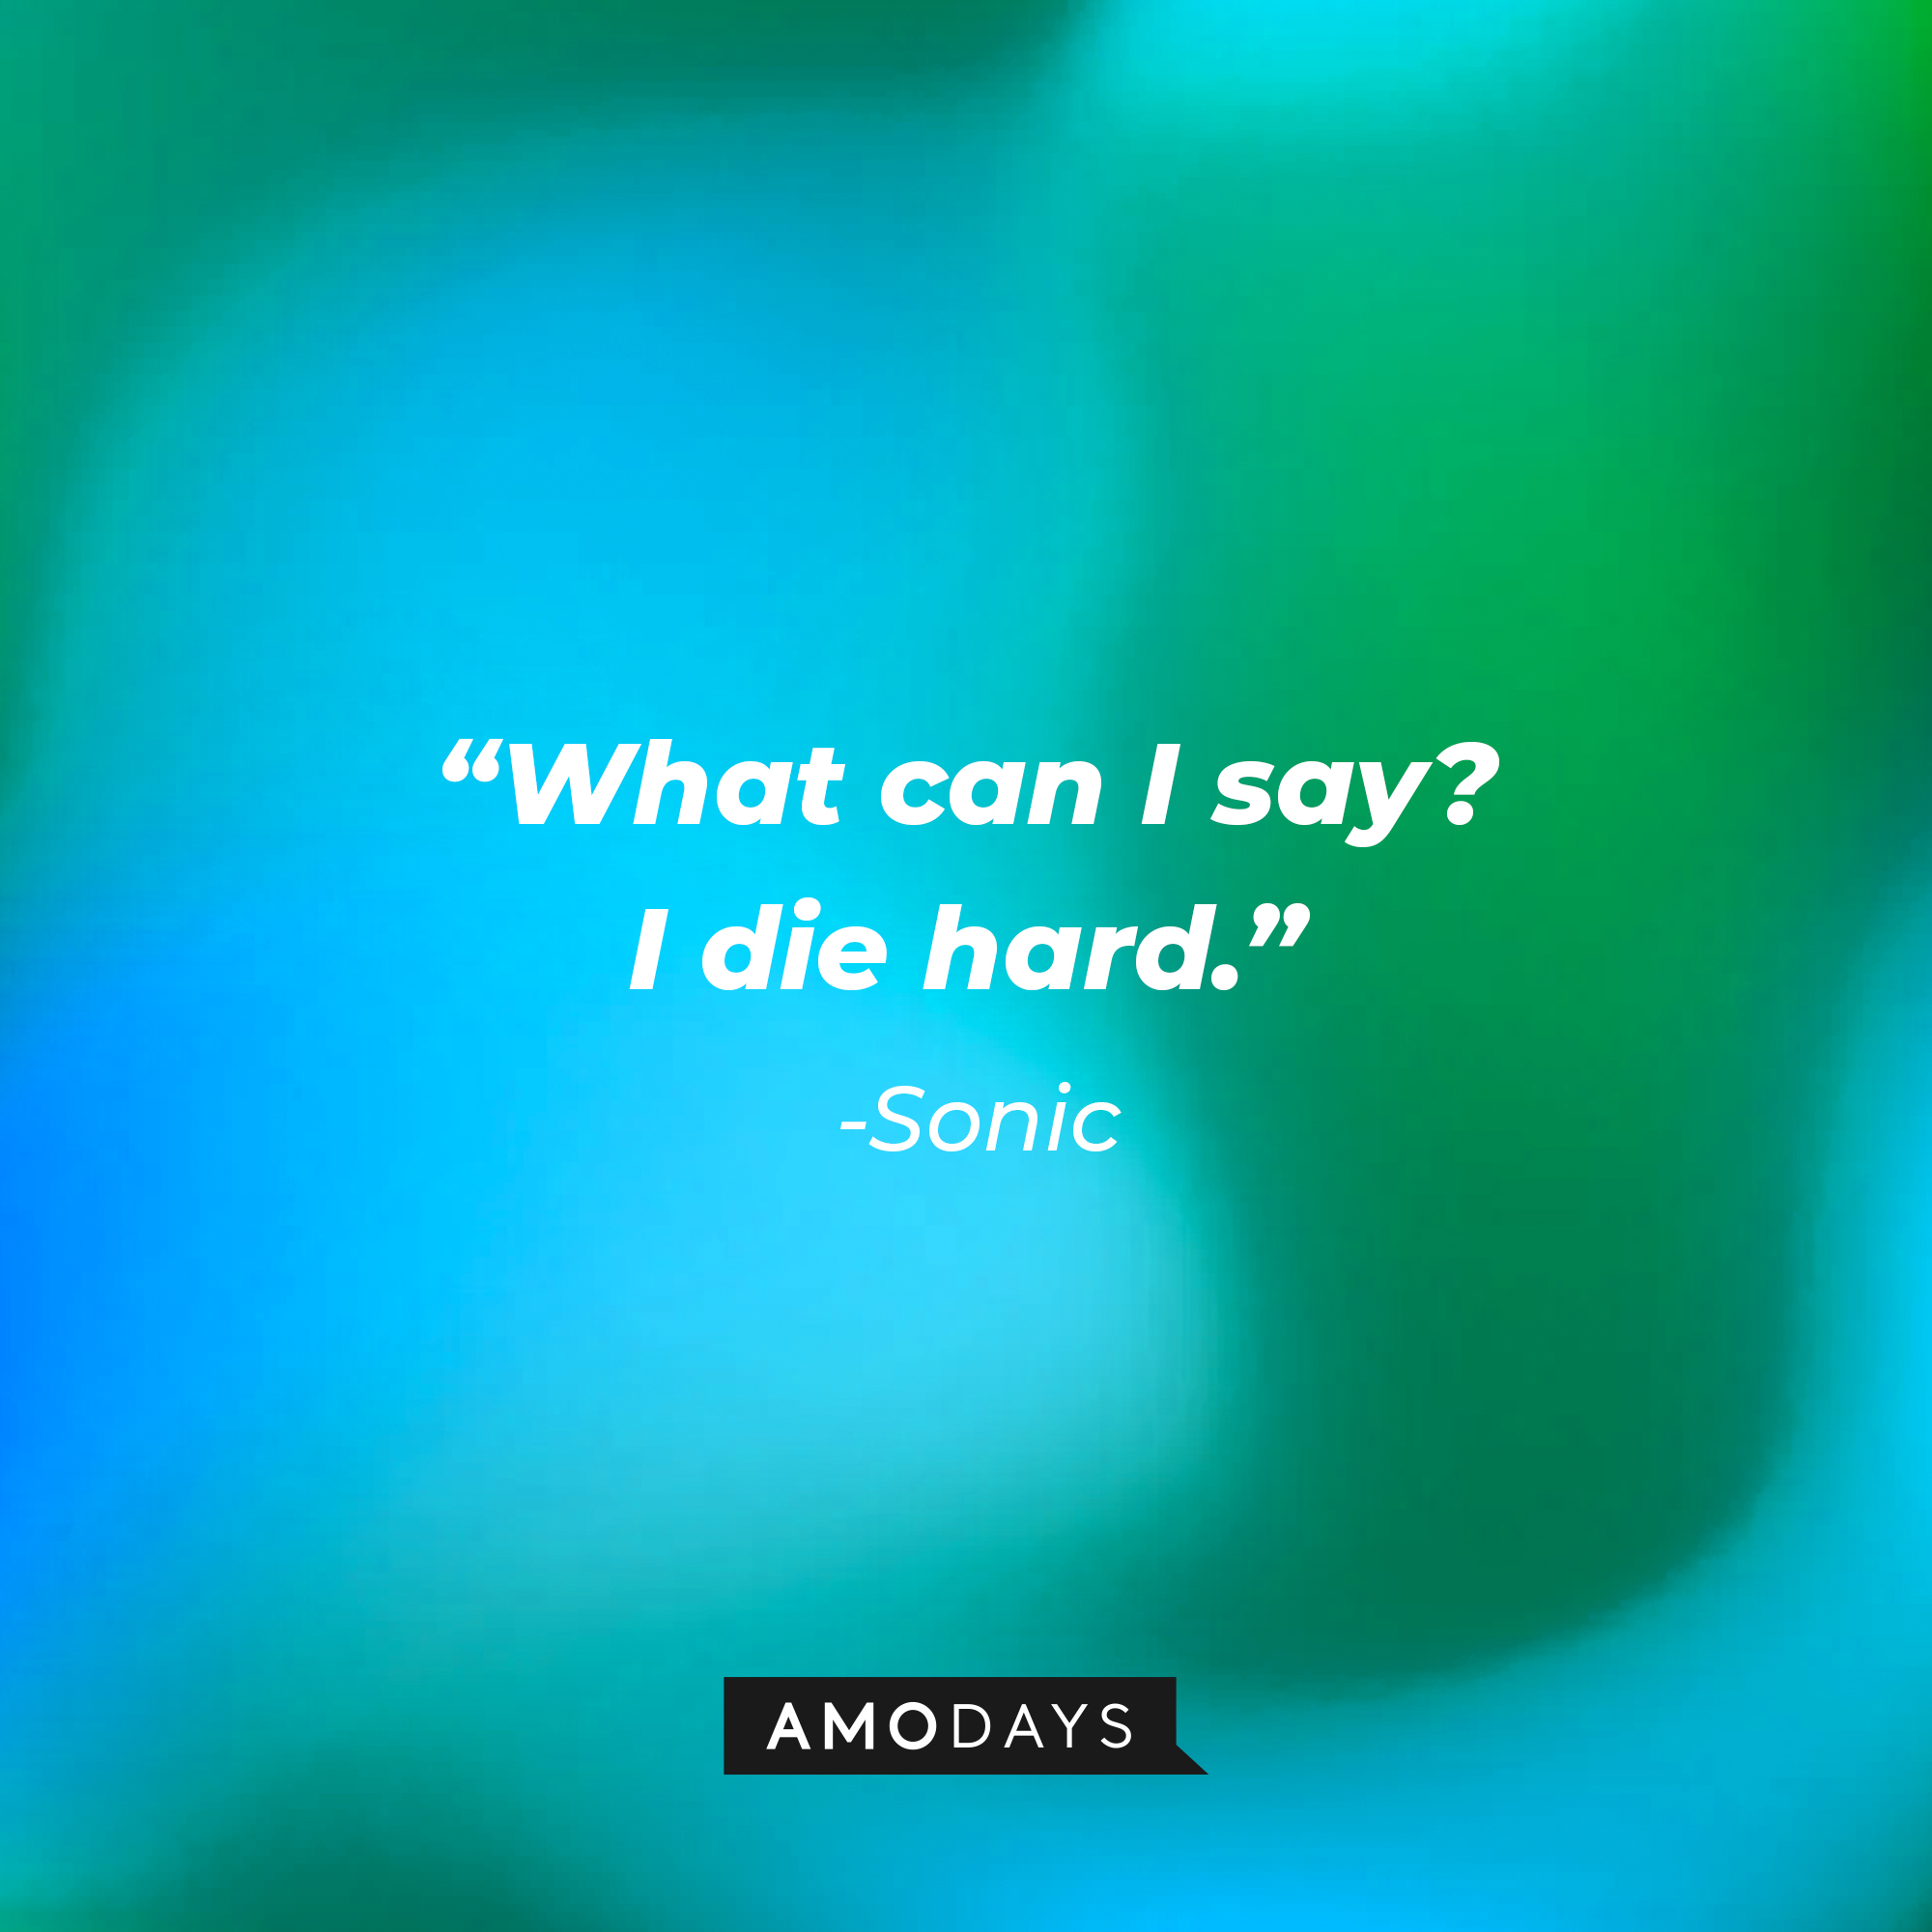 Sonic's quote: "What can I say? I die hard."  | Source: Amodays